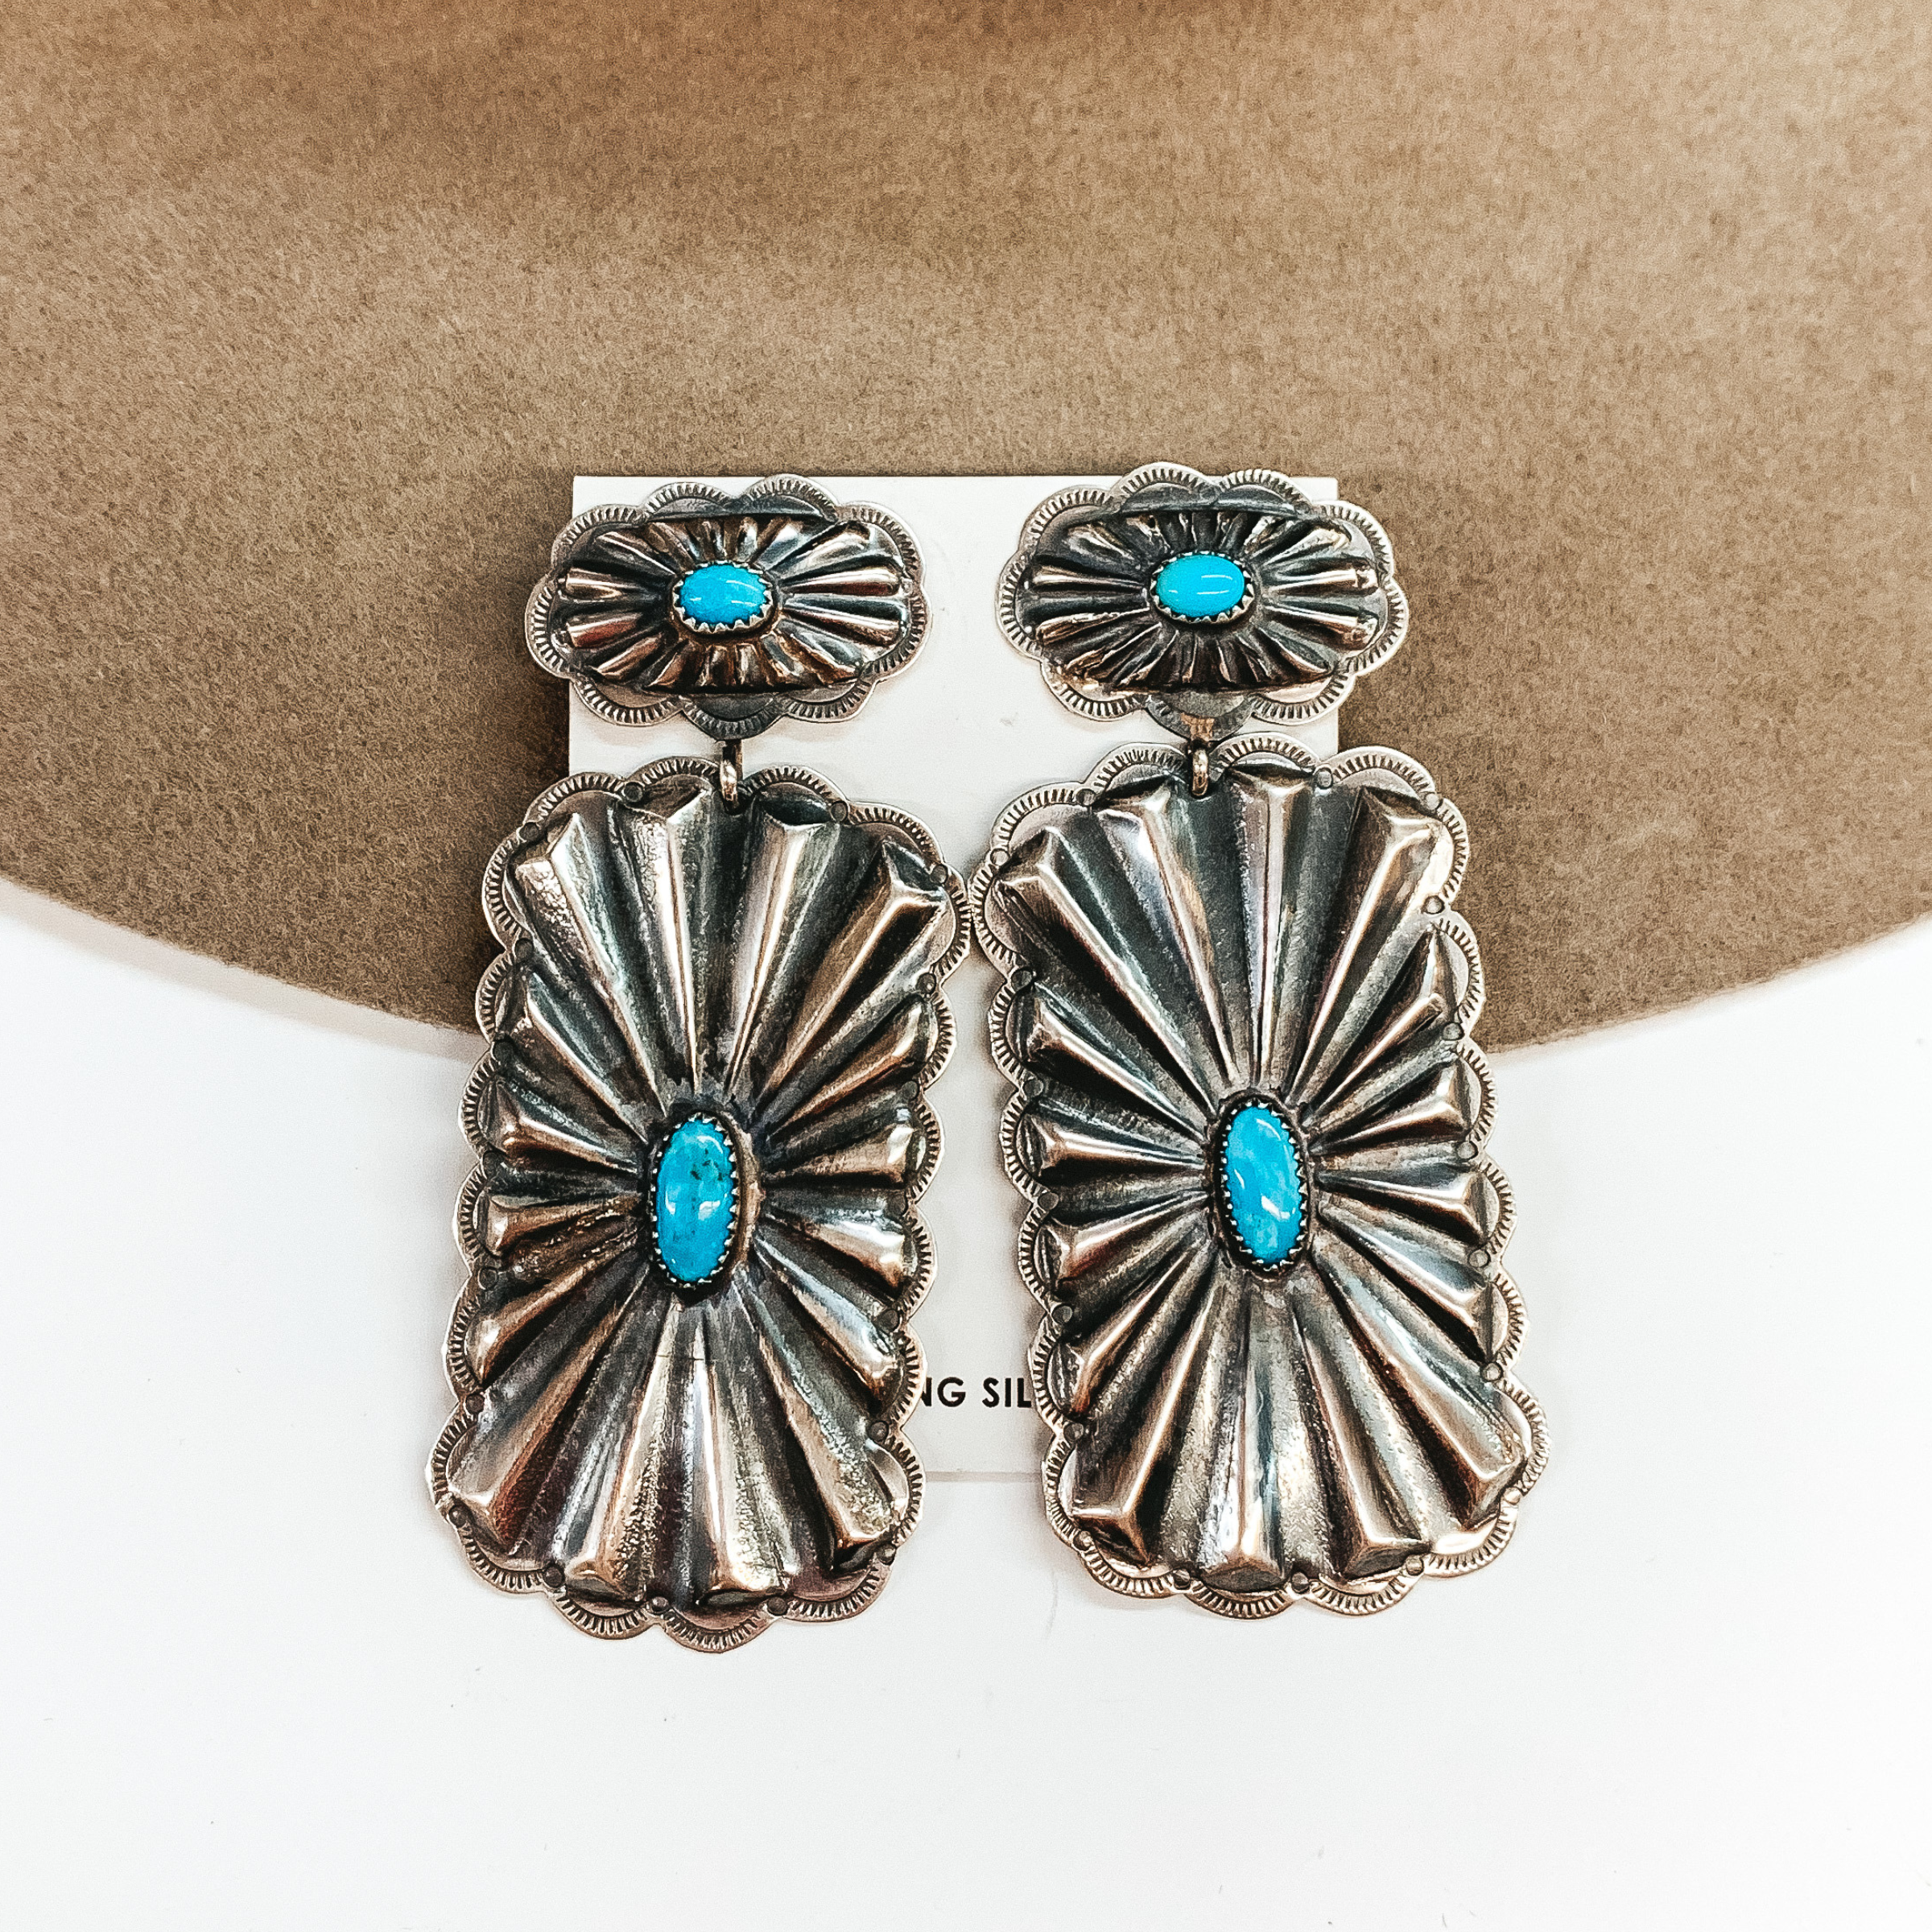 Silver oval concho post earrings with a rectangle concho drop. Both conchos have turquoise stones in the center. These earrings are pictured on a tan and white background. 